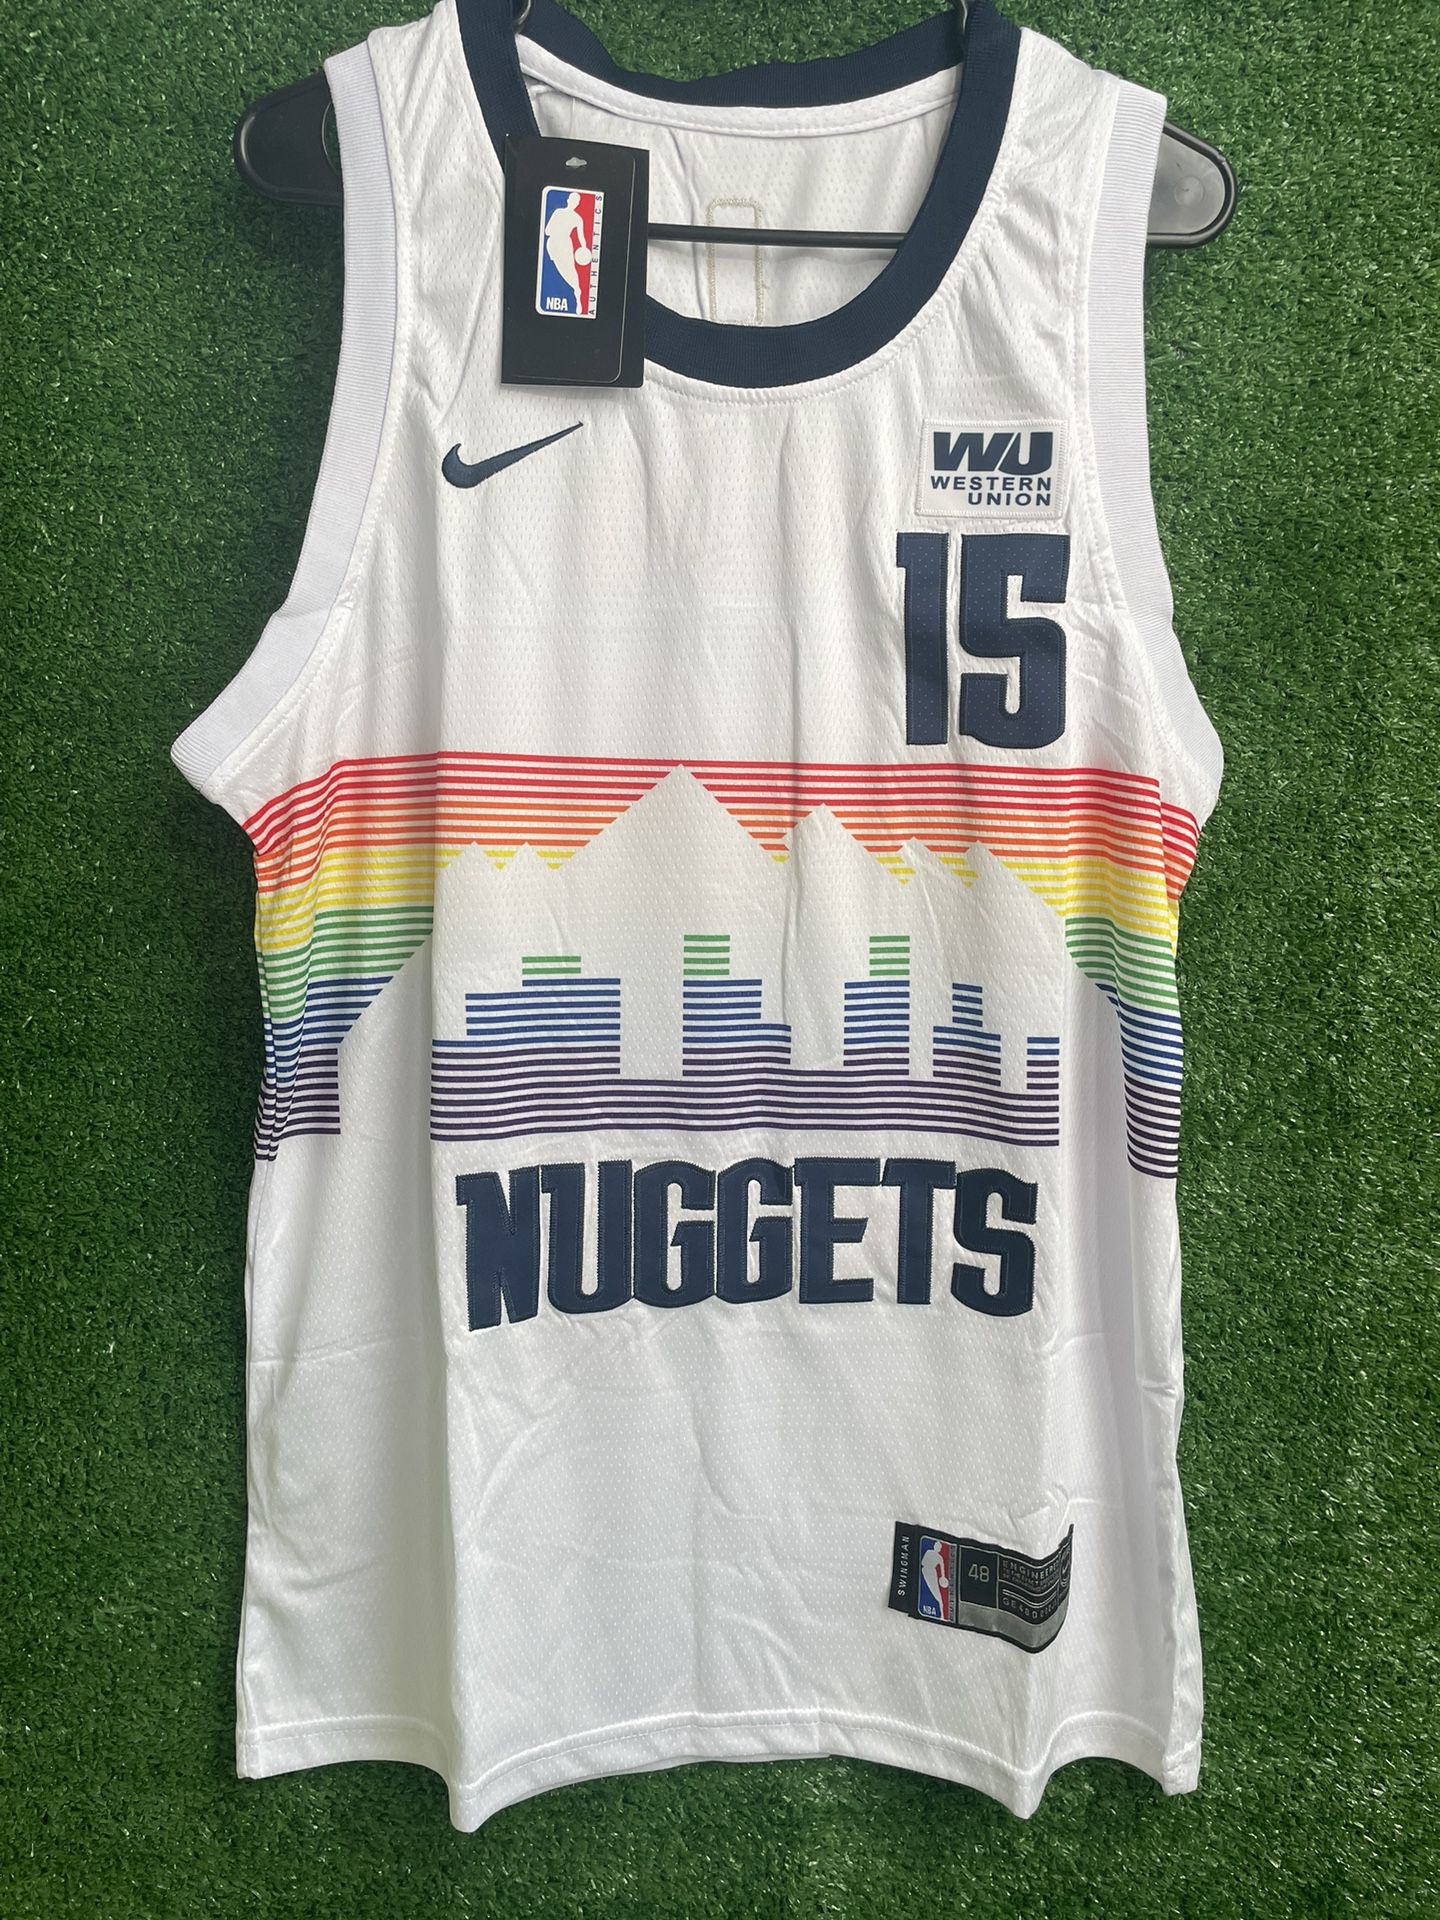 NIKOLA JOKIC DENVER NUGGETS NIKE JERSEY BRAND NEW WITH TAGS SIZES MEDIUM, LARGE, AND XL AVAILABLE 